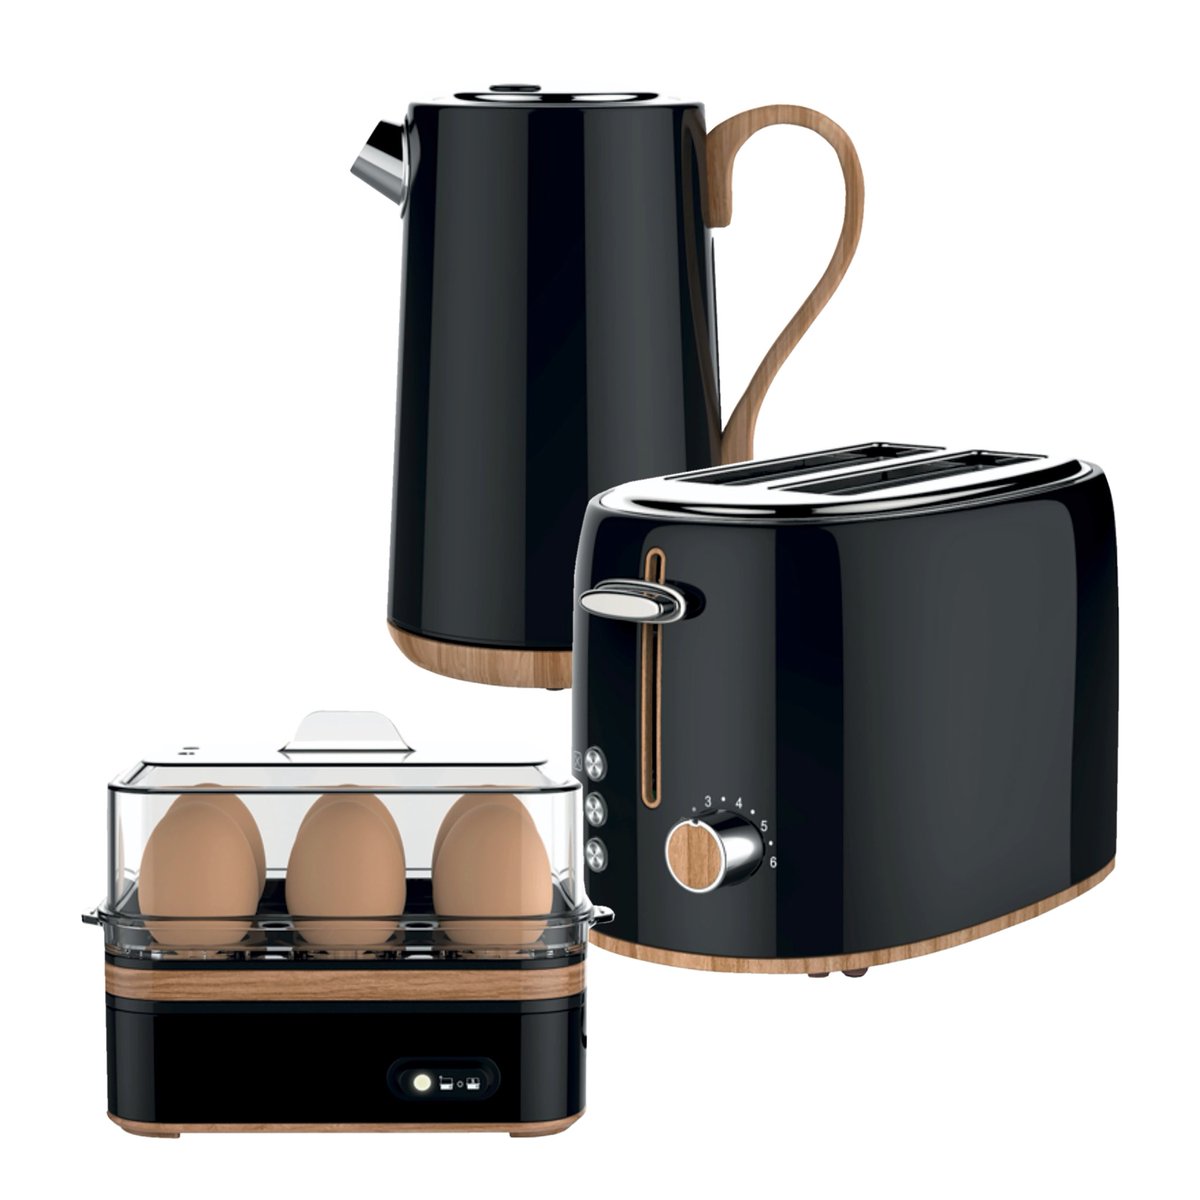 The new Swan black breakfast pack with wooden effects is now available!  #swanappliances #kitchenappliances #kettle #toaster #eggboiler